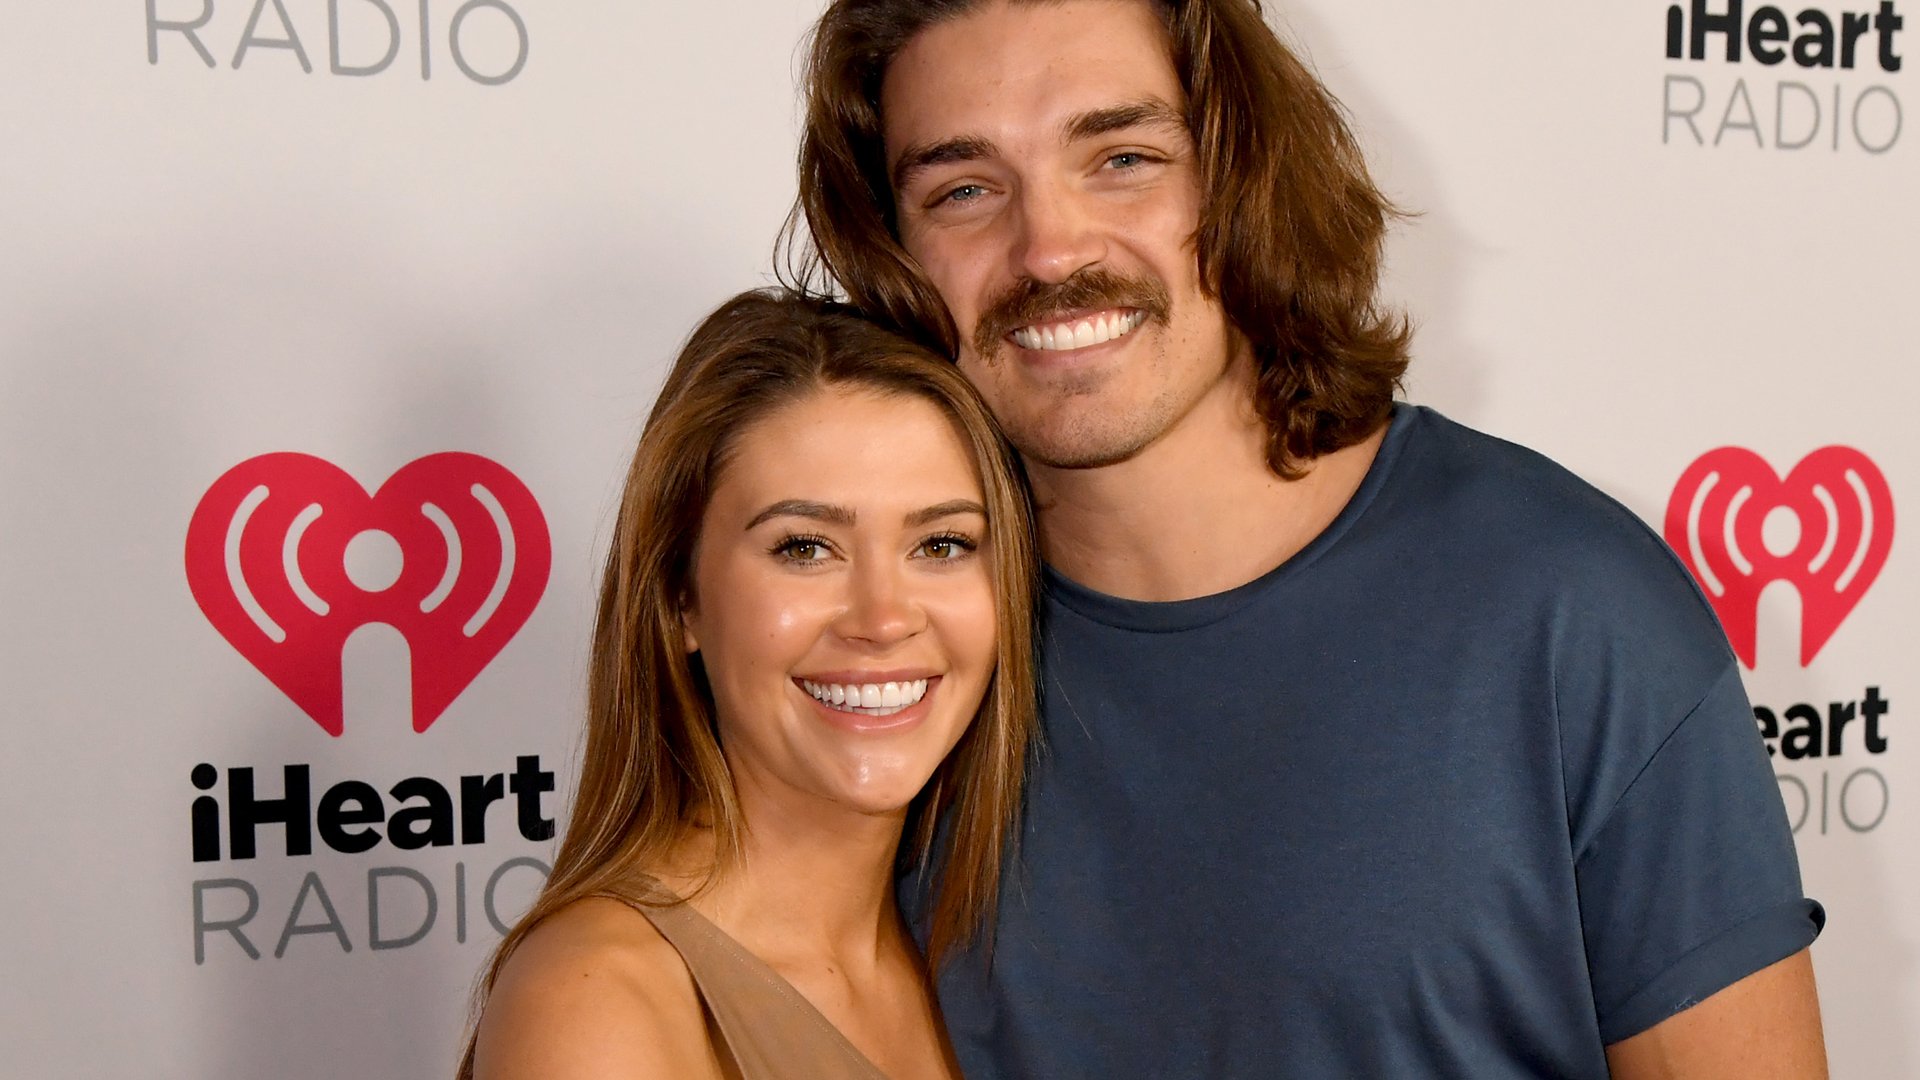 'Bachelor in Paradise' stars Caelynn Miller-Keyes and Dean Unglert attend the 2020 iHeartRadio Podcast Awards at the iHeartRadio Theater on January 17, 2020 in Burbank, California.